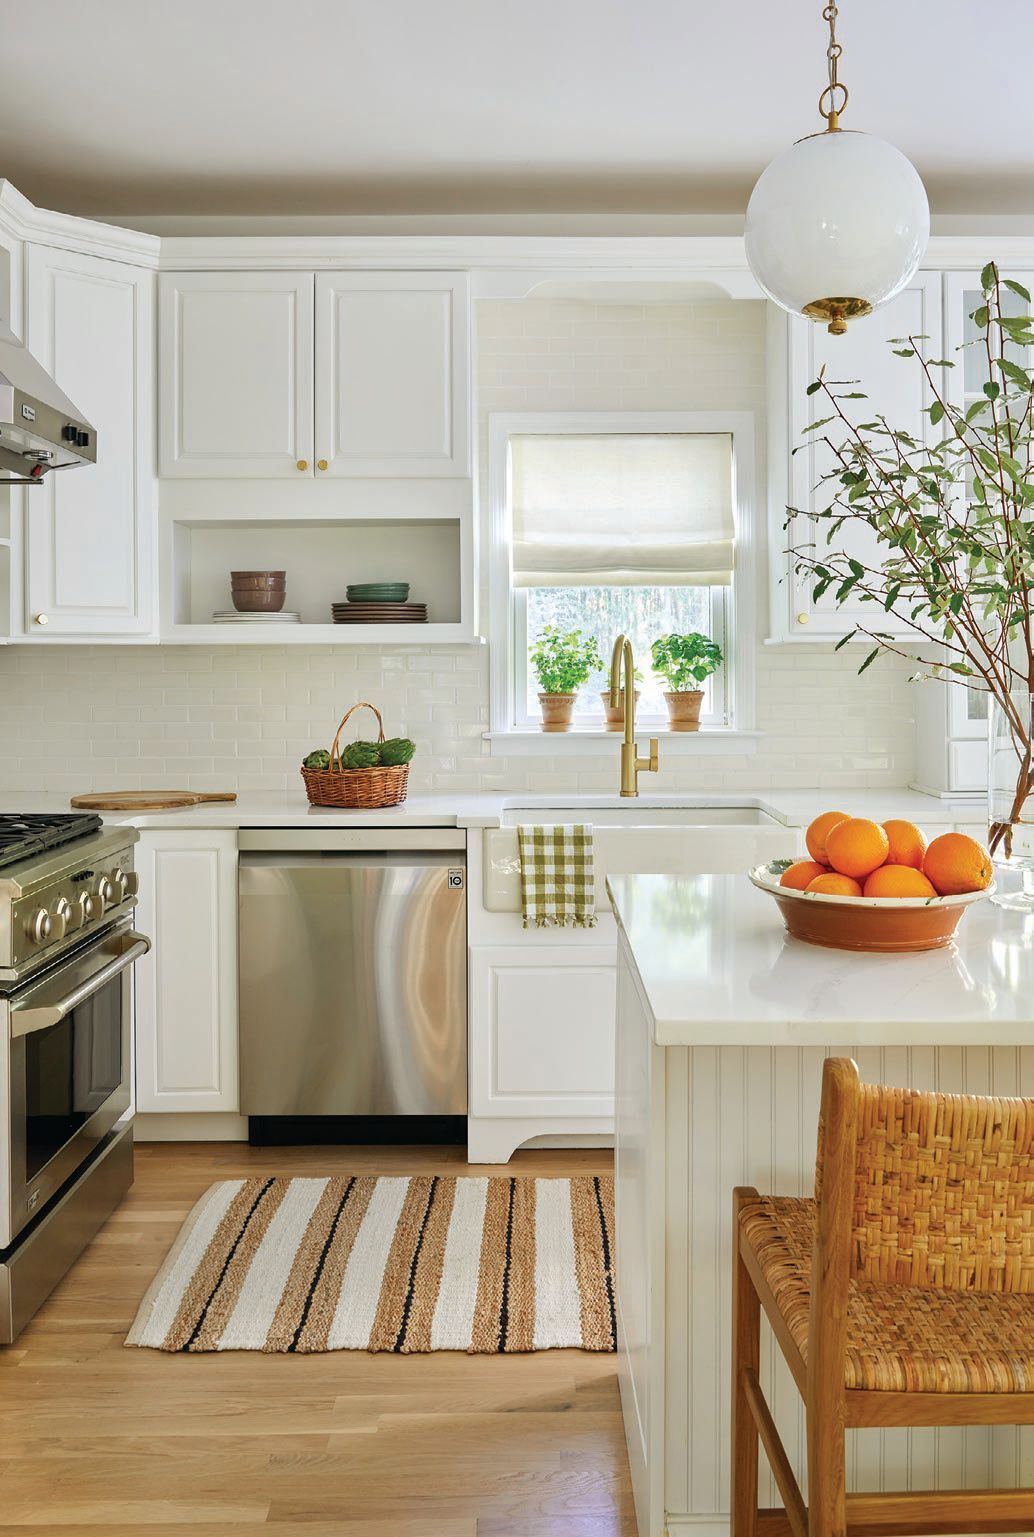 the kitchen is complete with clean lines, lush accents and state-of-the-
art appliances. PHOTOGRAPHED BY KIRSTEN FRANCIS